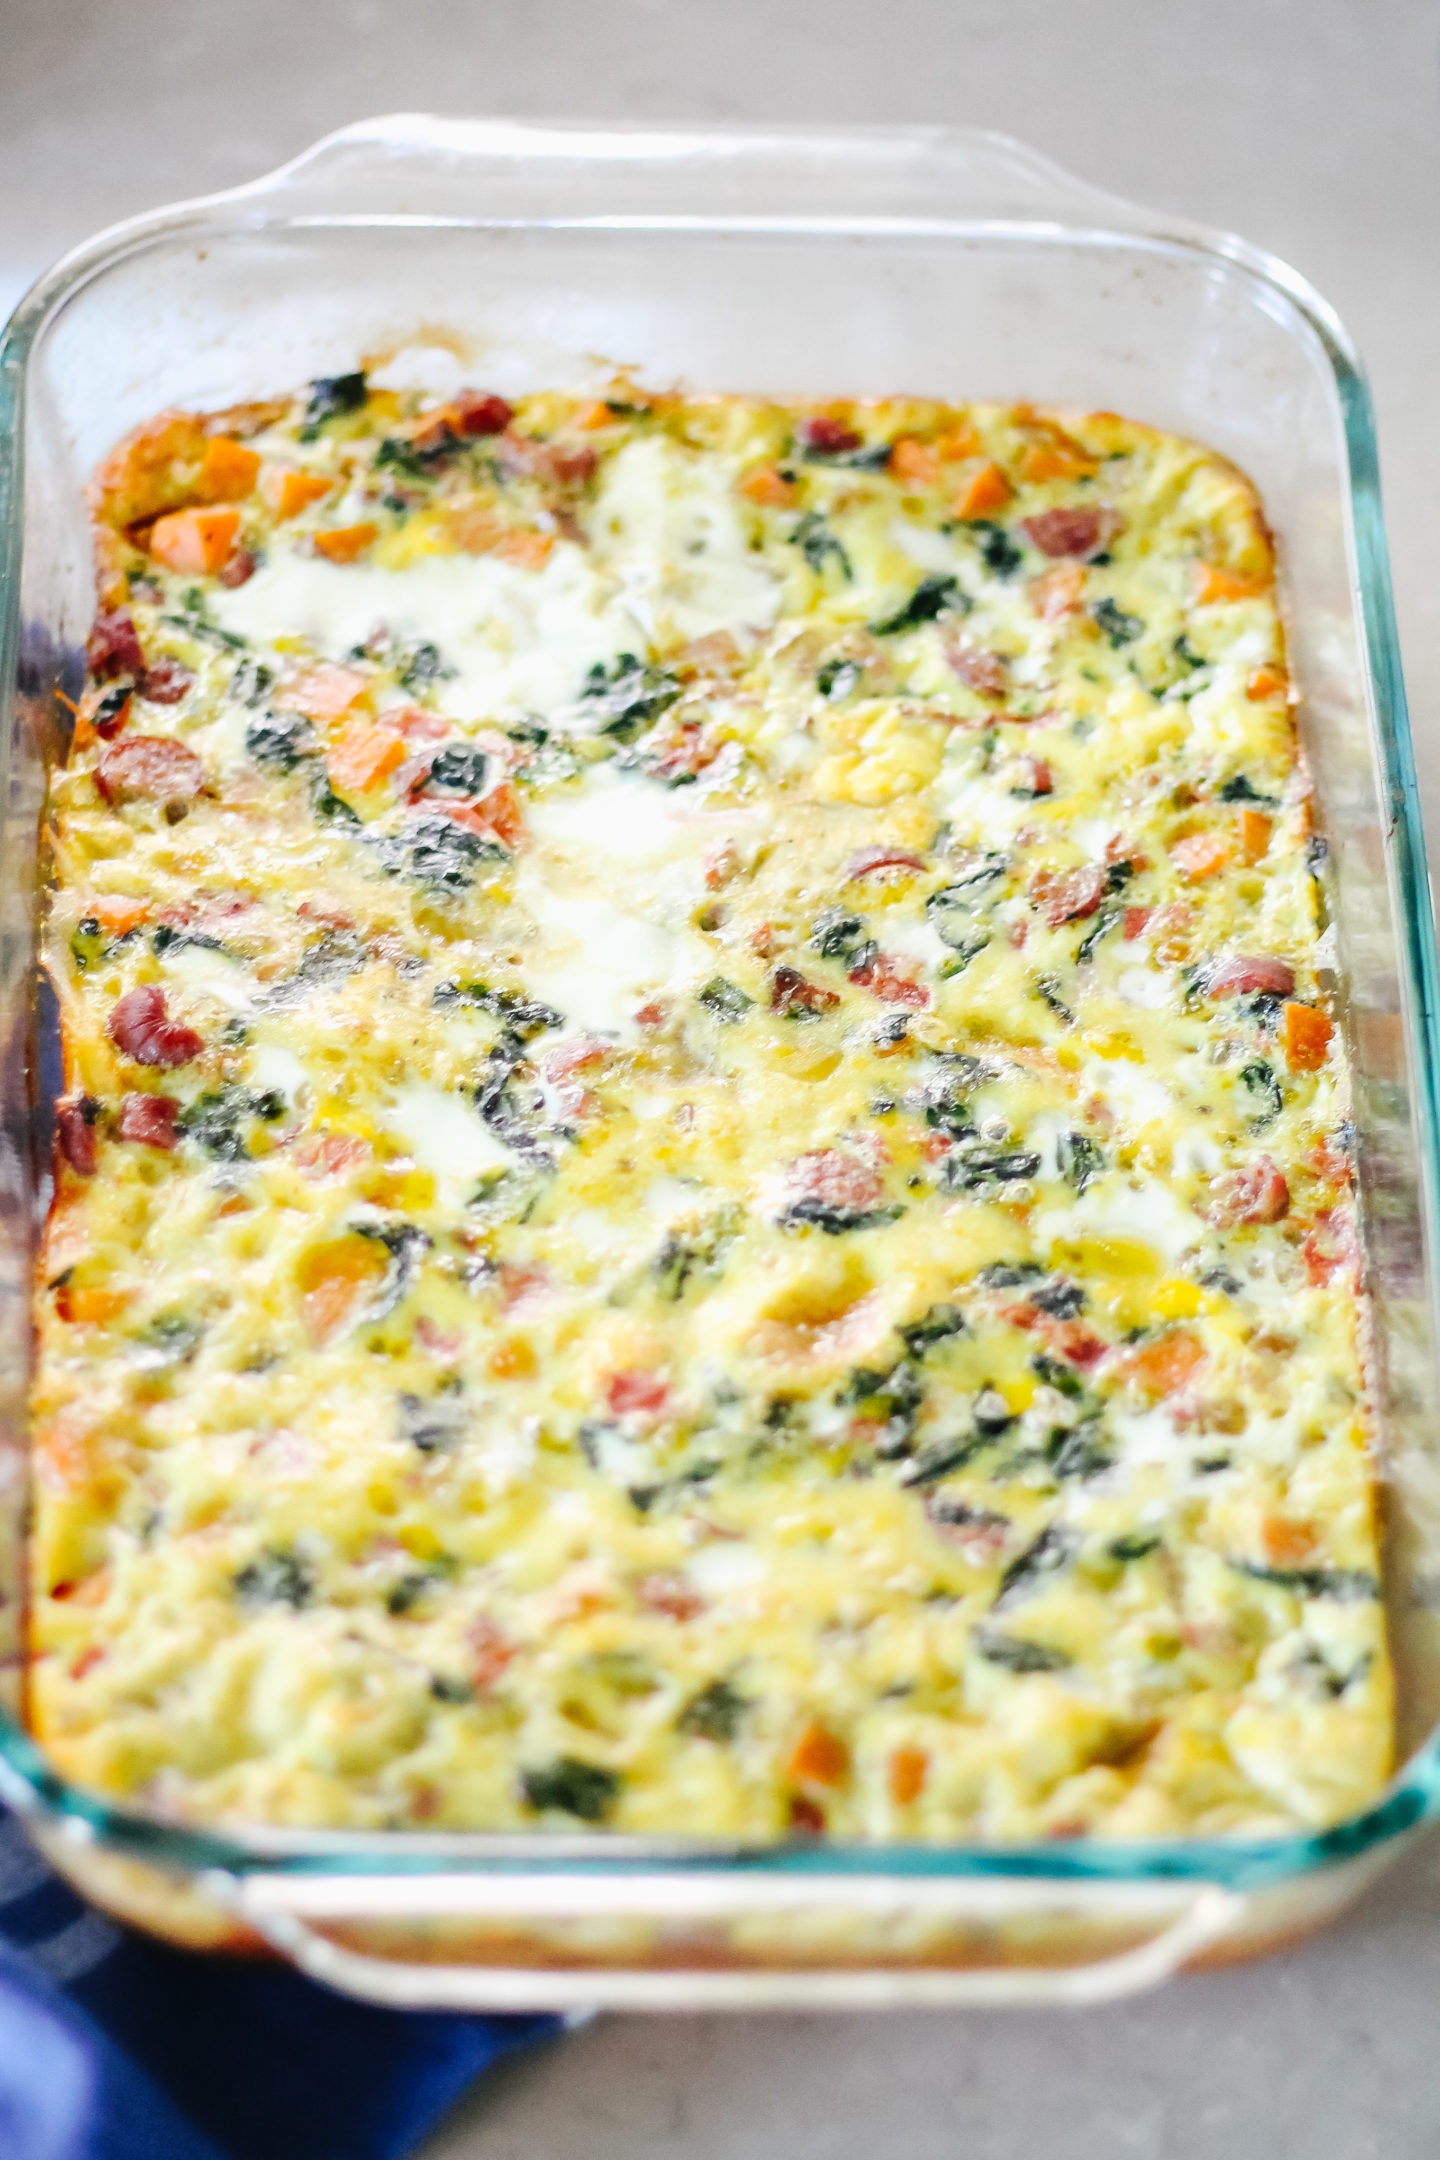 The best easy & delicious Paleo and Whole30 breakfast casserole. The perfect breakfast bake! #casserole #paleo #whole30